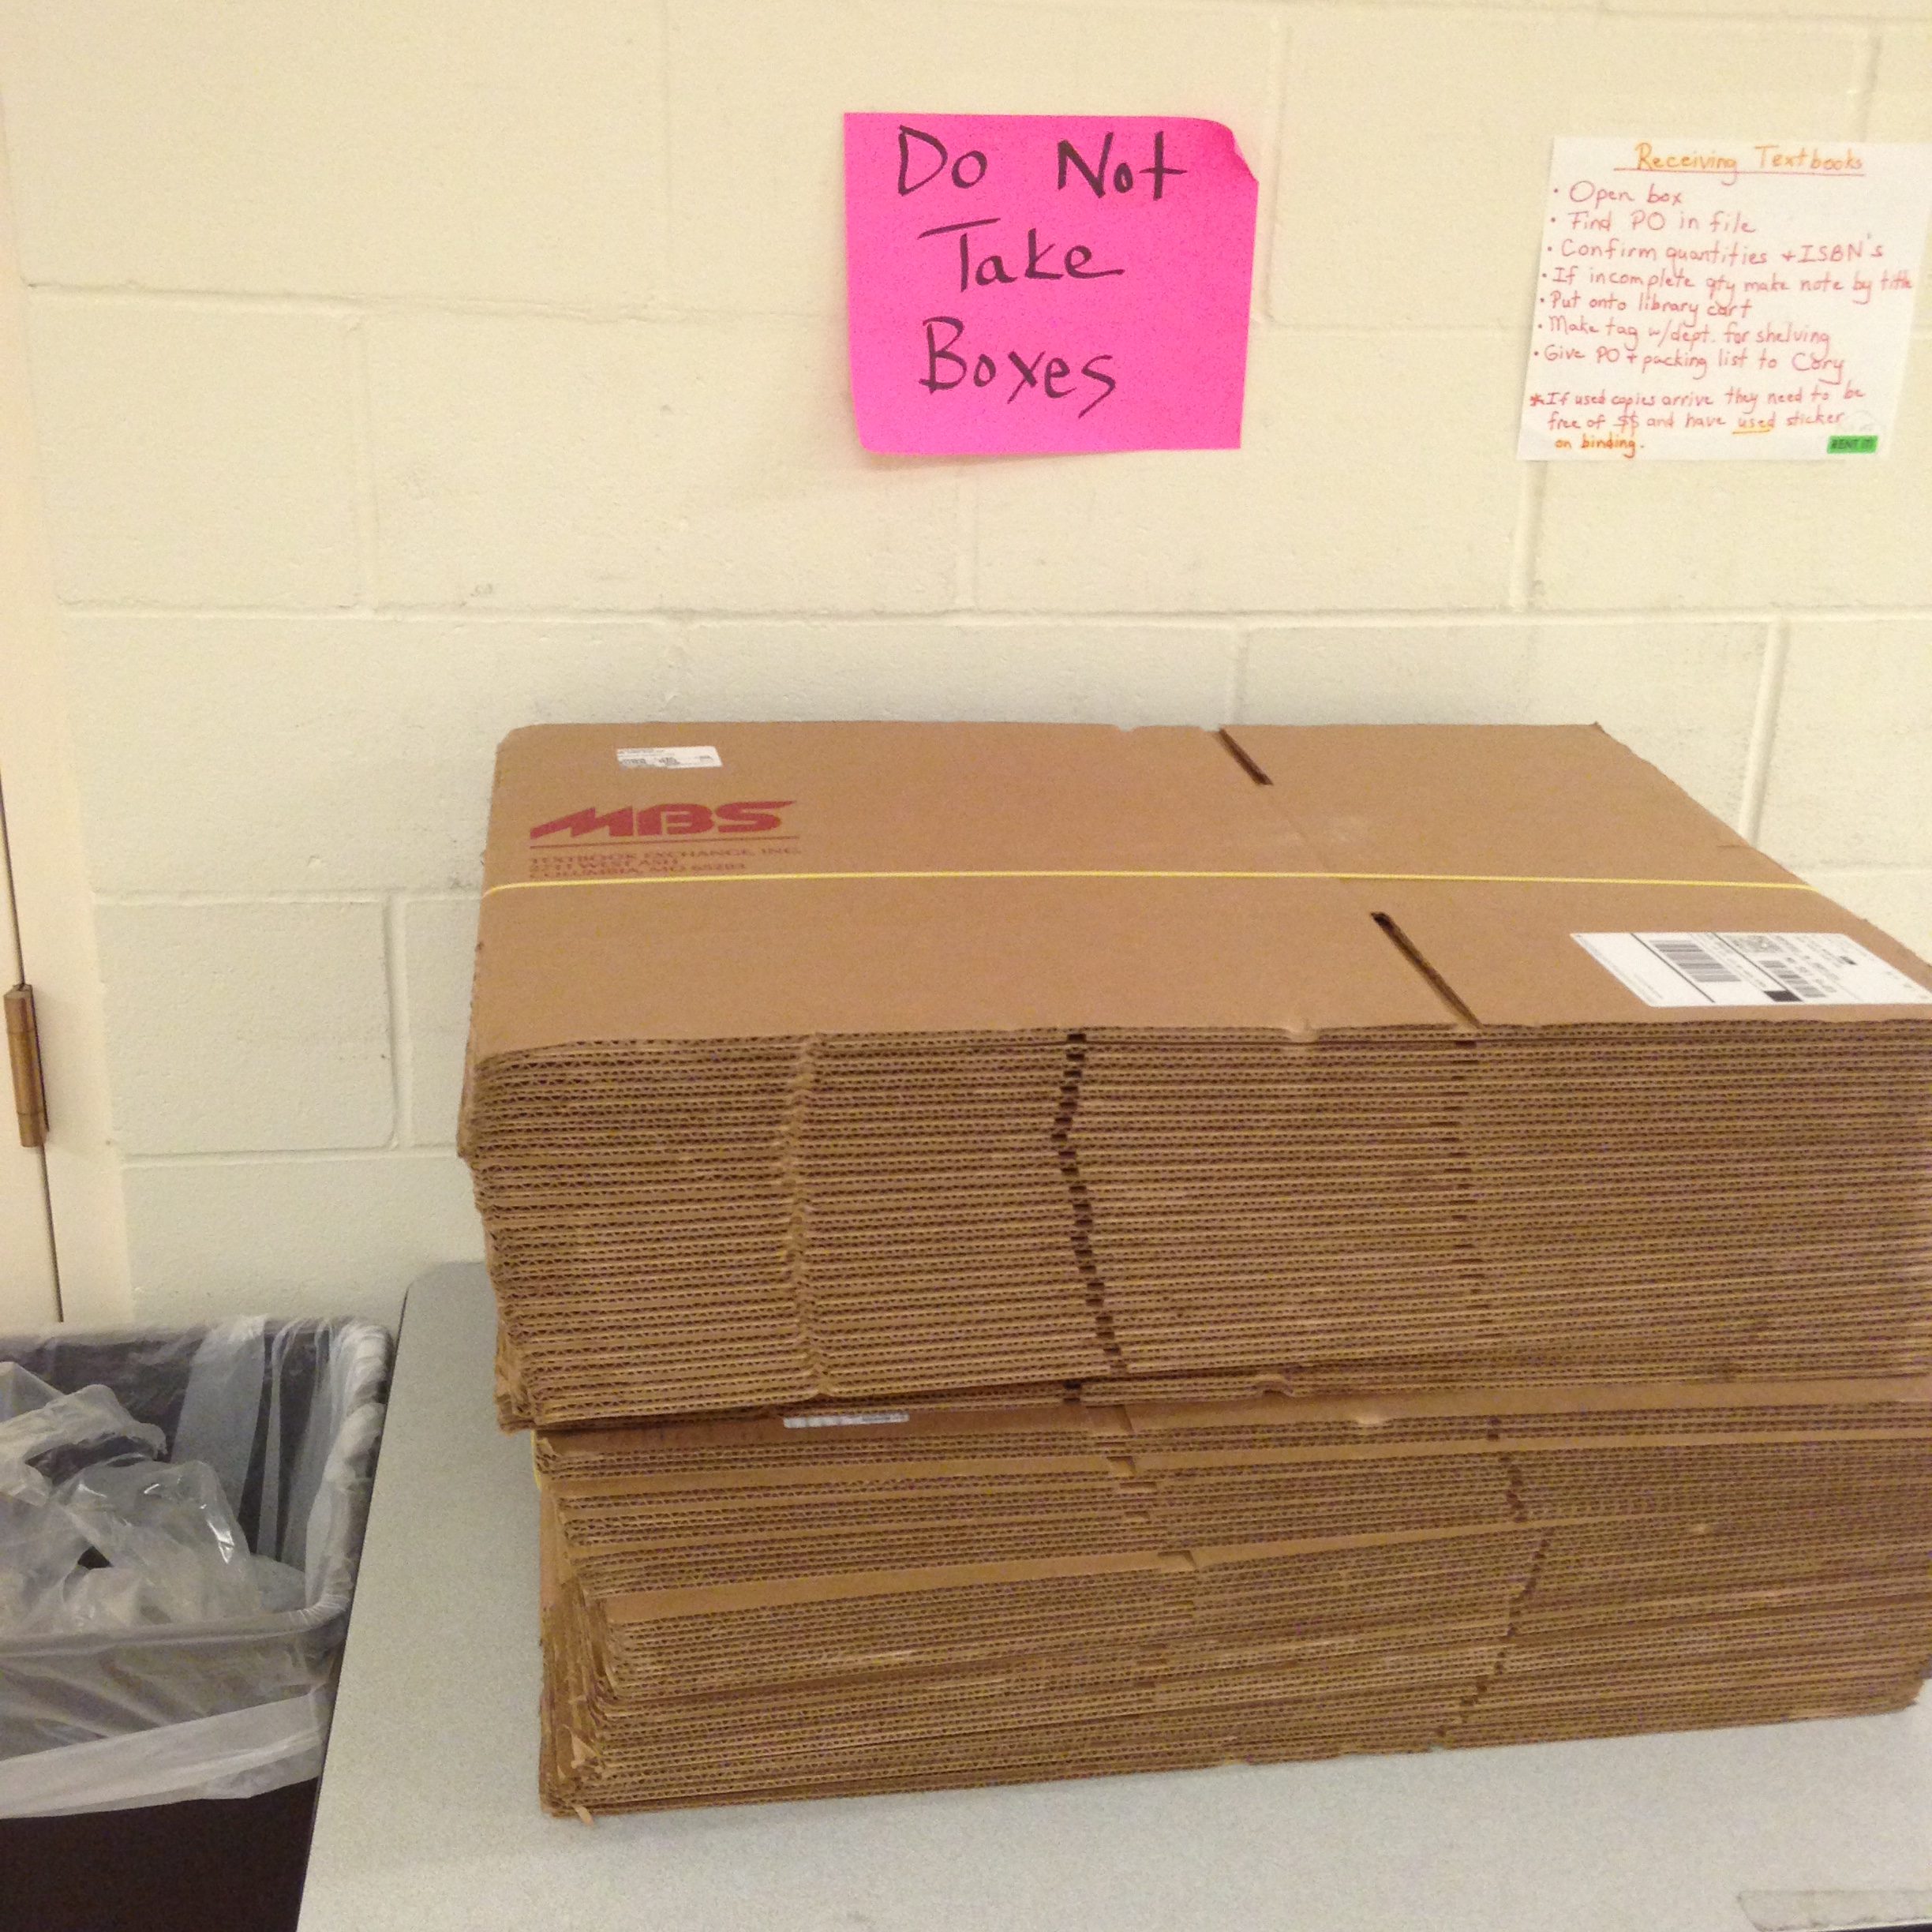 A handwritten sign in chisel-point Sharpie on pink construction paper, reading “Do Not Take Boxes”, affixed to a cinder-block wall above a table bearing several sets of ten new, flattened cardboard boxes still zip-tied together.